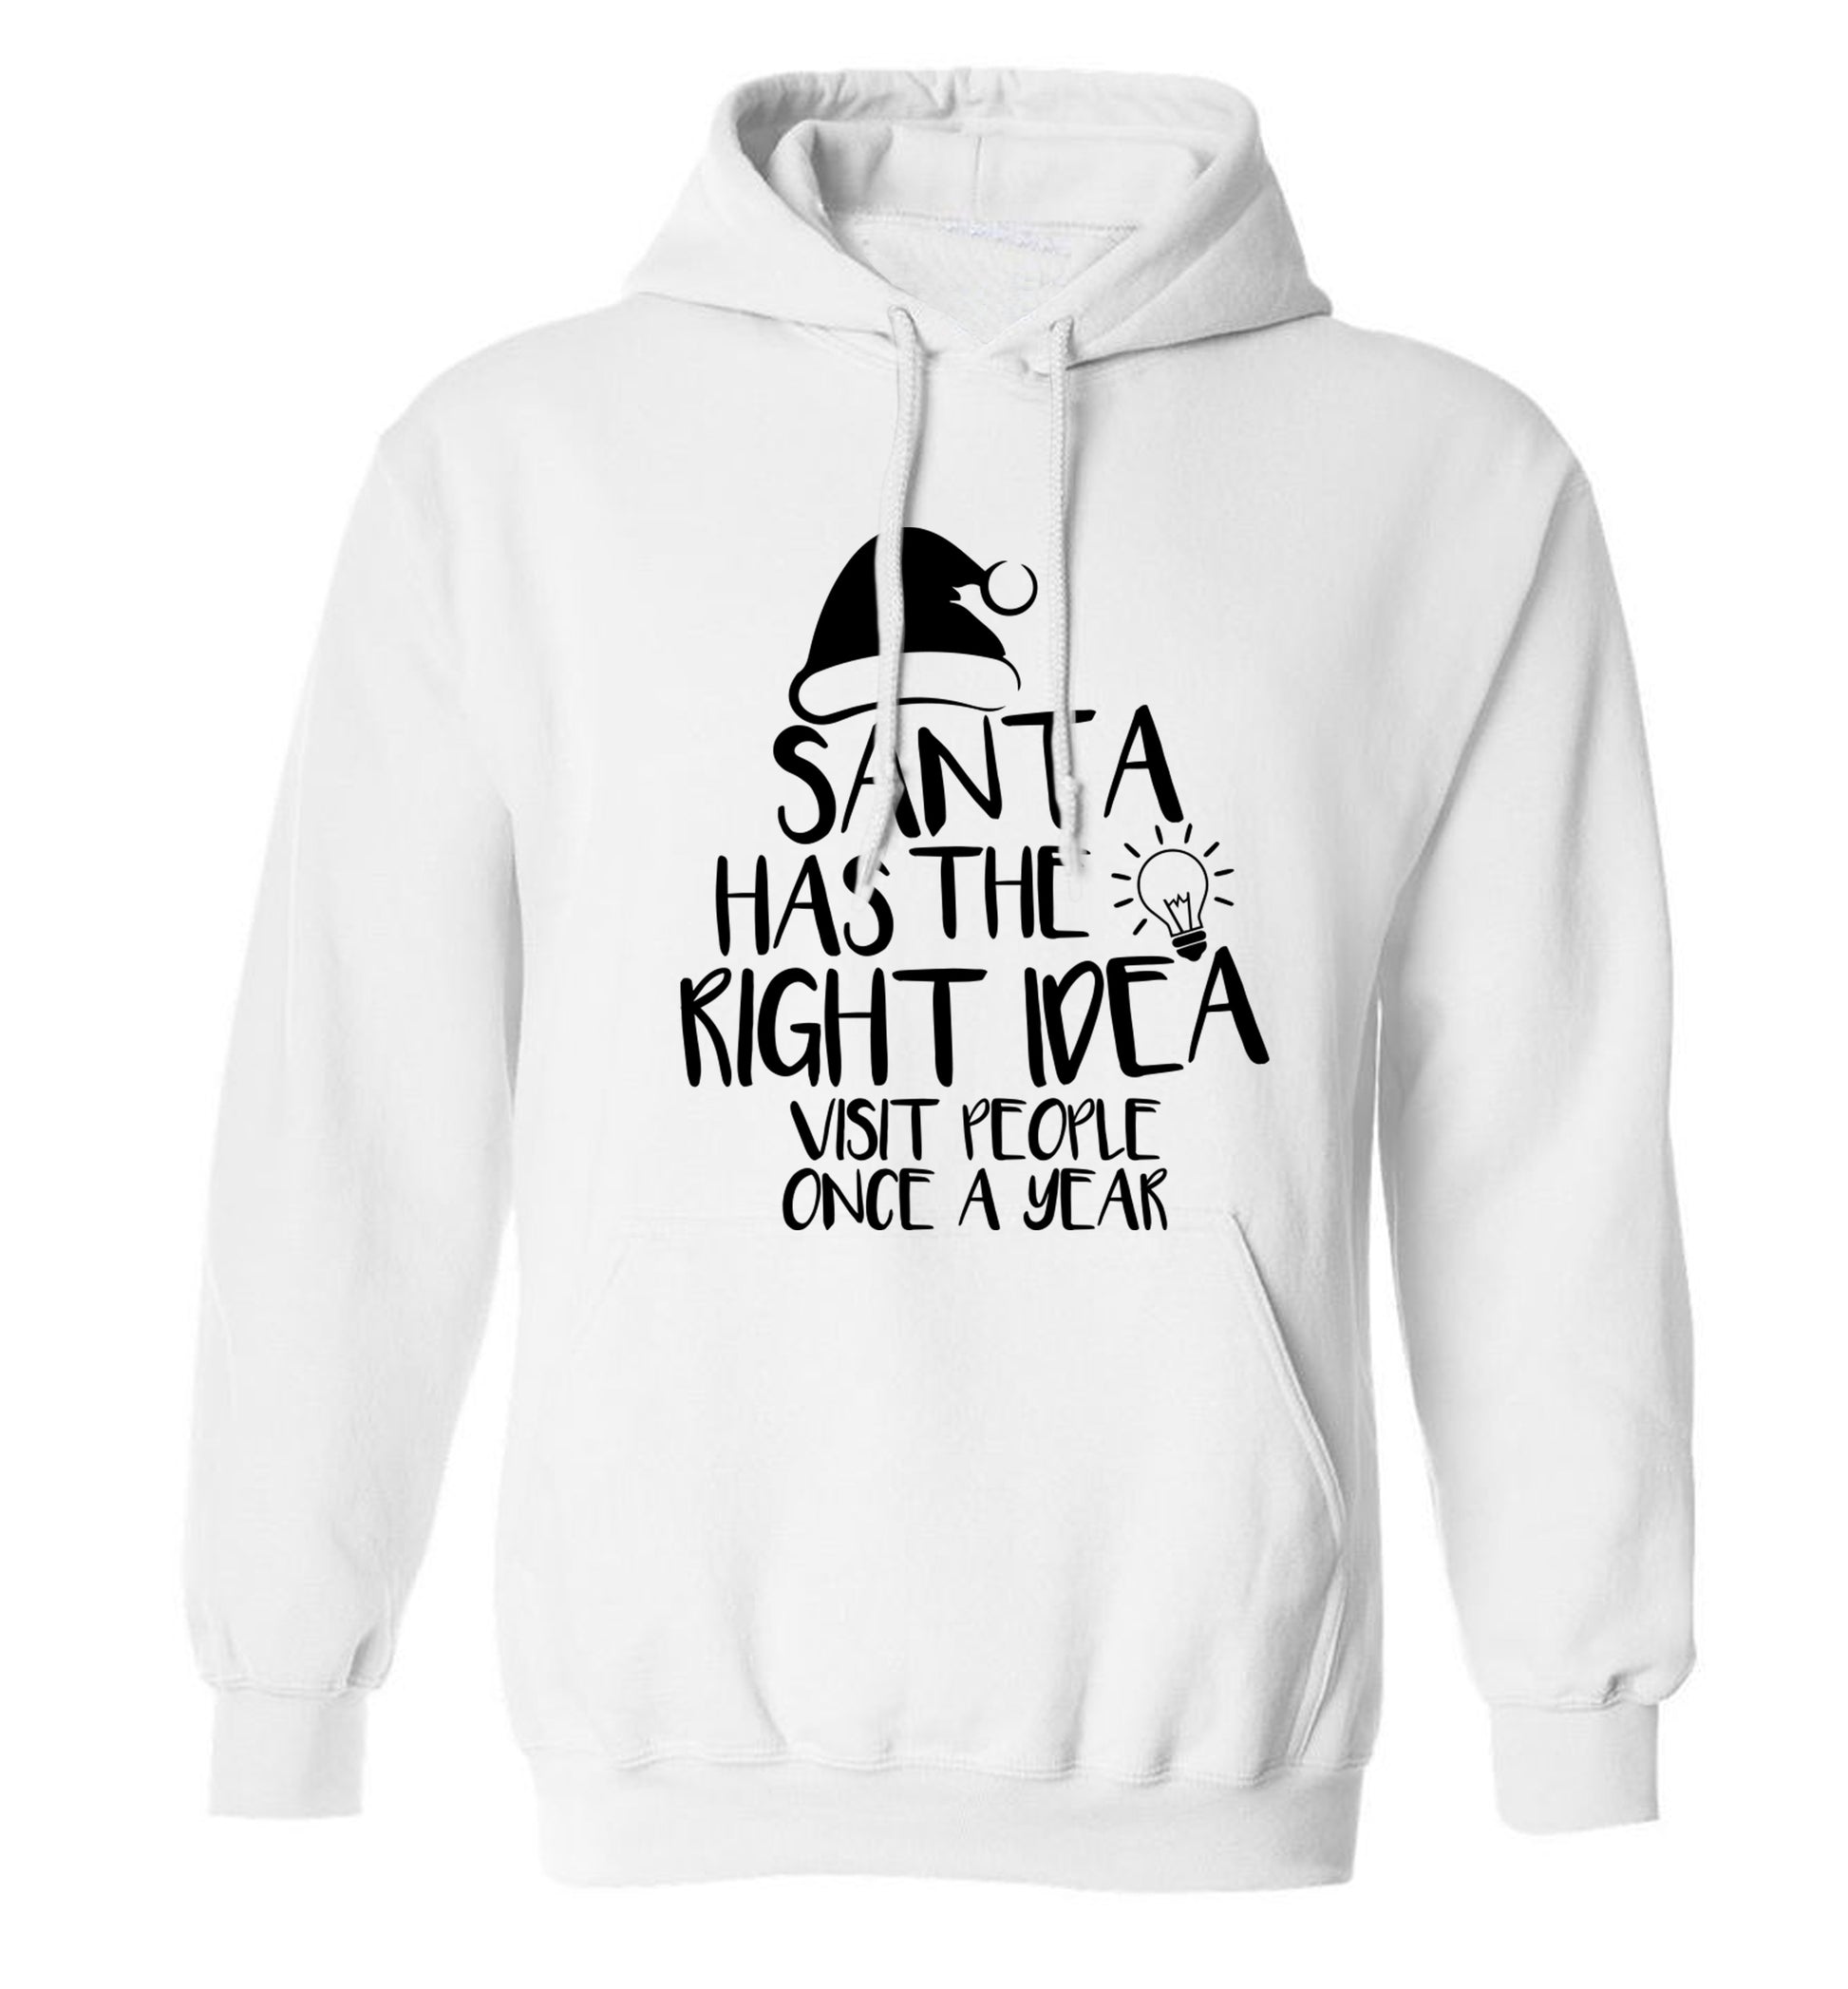 Santa has the right idea visit people once a year adults unisex white hoodie 2XL